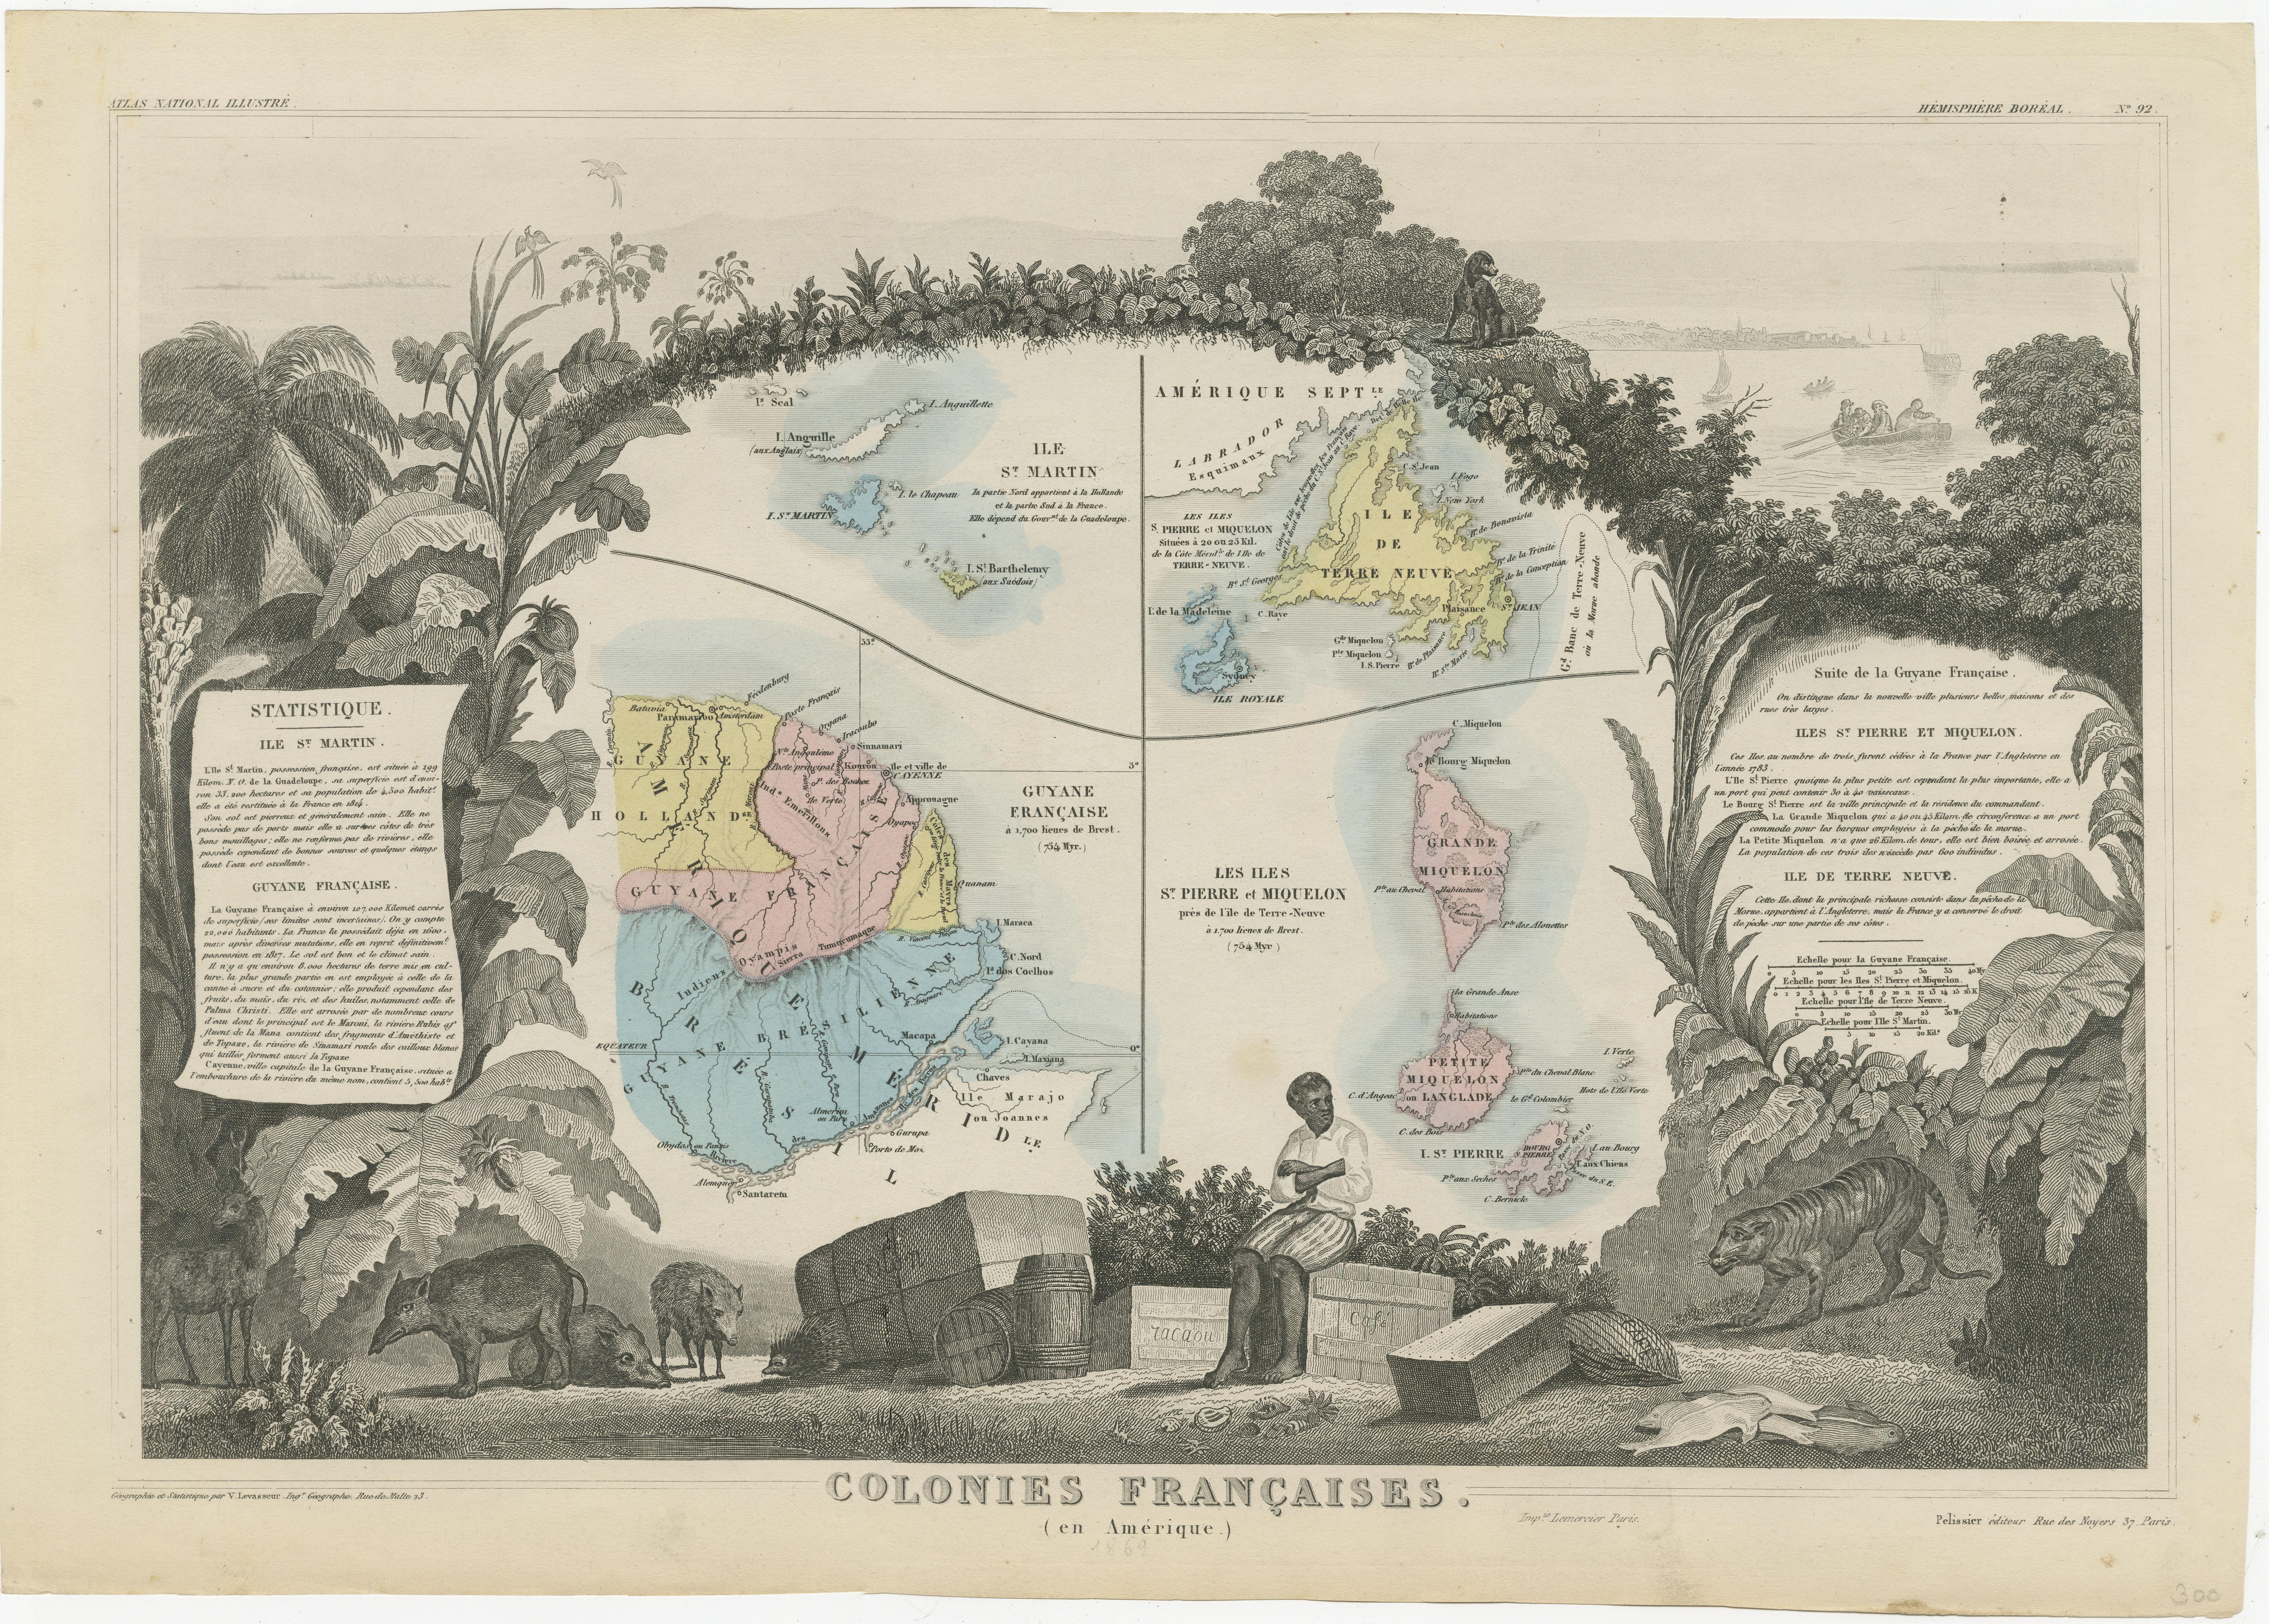 Antique map titled 'Colonies Francaises (en Amerique)'. Detailed map bordered by vignettes showing local animals, produce and activities of the various French Colonies in America. This map originates from ‘Atlas National de la France Illustré’.